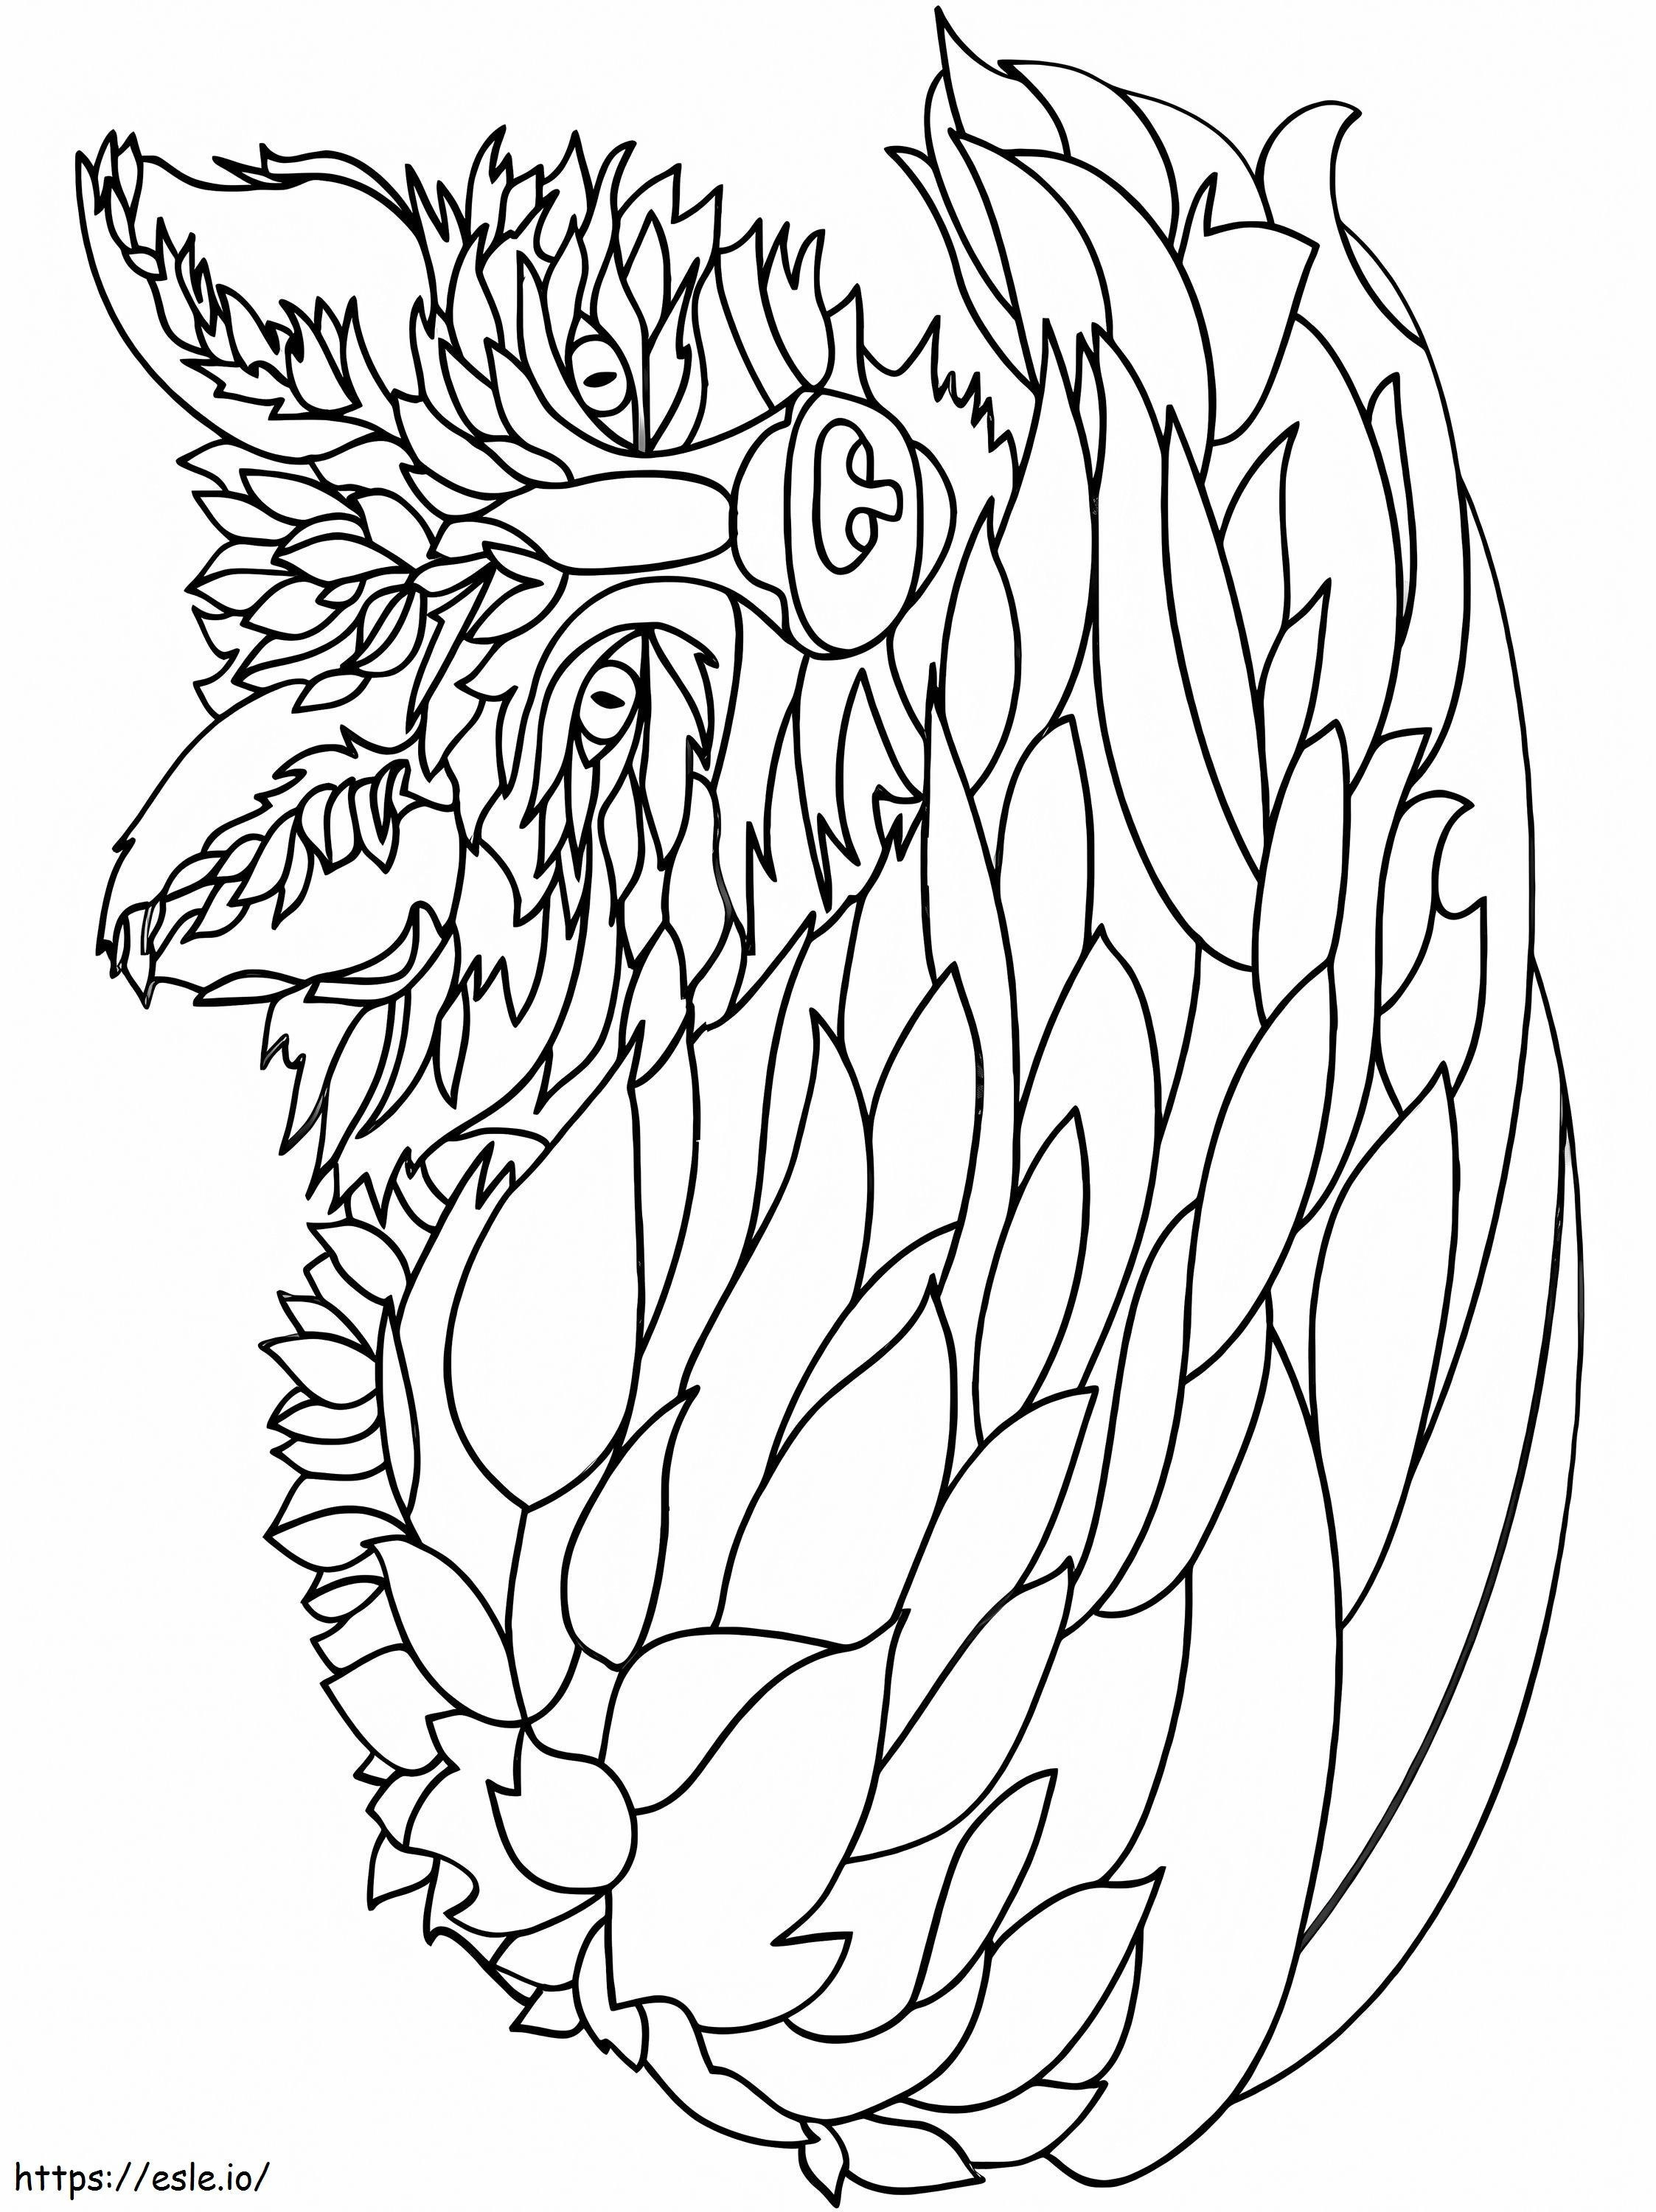 1562807418 Special Fox A4 coloring page